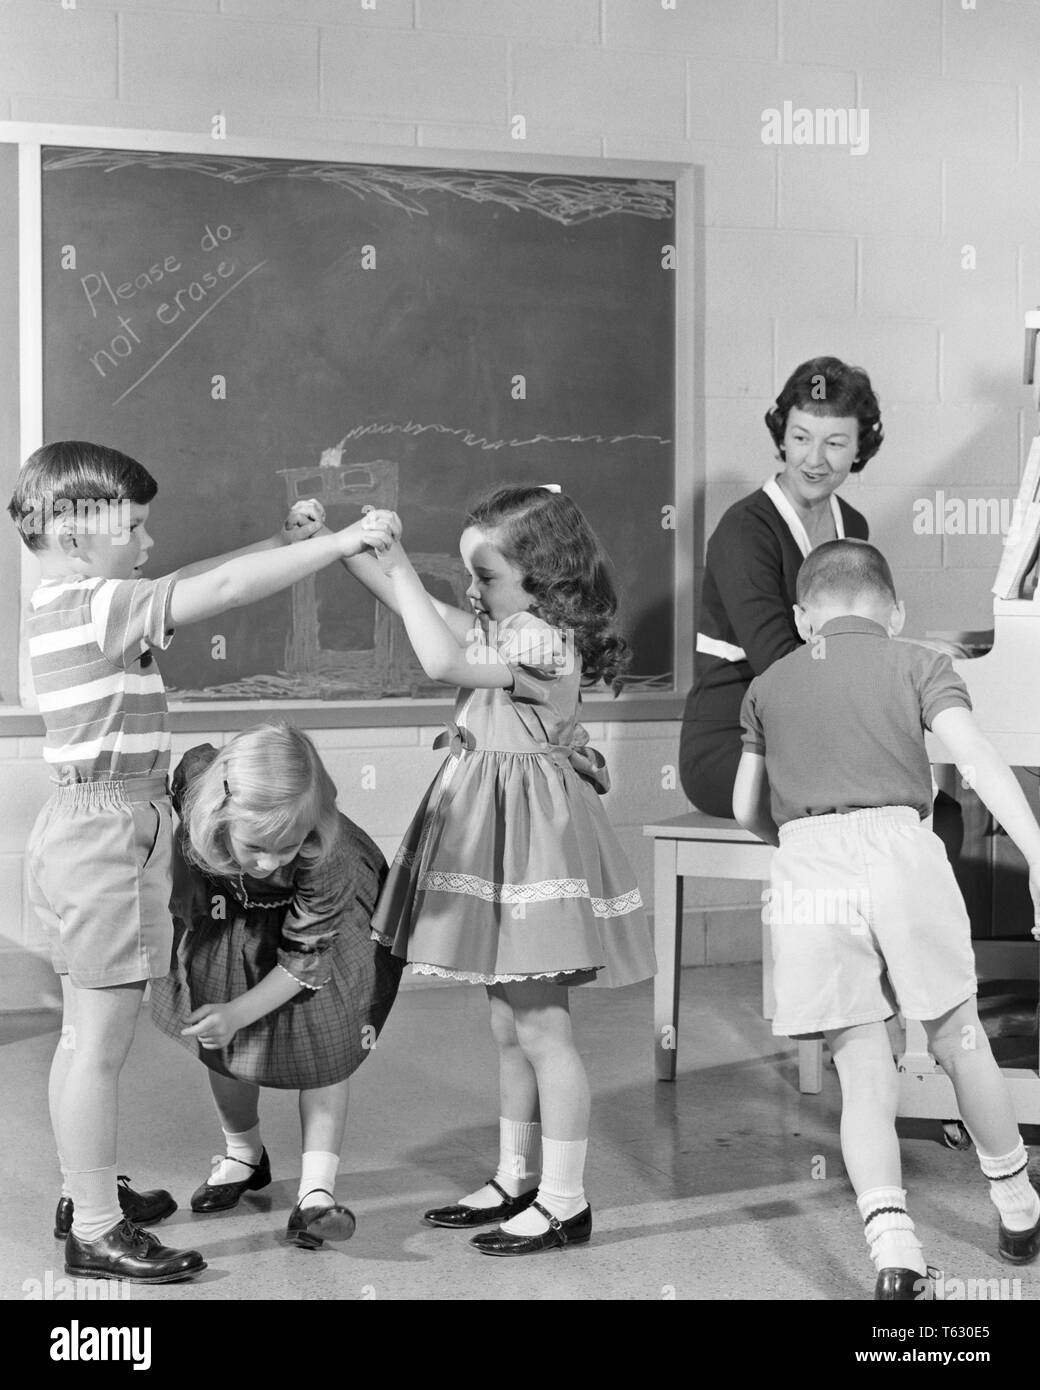 1950s 1960s SMILING WOMAN TEACHER PLAYING PIANO WHILE CHILDERN KINDERGARTEN STUDENTS DANCE AND PLAY - s13150 HAR001 HARS 1 JUVENILE TEACHERS LIFESTYLE SOUND FIVE MUSICIAN FEMALES 5 HEALTHINESS COPY SPACE FRIENDSHIP FULL-LENGTH HALF-LENGTH LADIES PHYSICAL FITNESS PERSONS DOING MALES B&W HAPPINESS KINDERGARTEN INSTRUCTOR MARY JANE OCCUPATIONS MUSICAL INSTRUMENT CONNECTION EDUCATOR IMAGINATION PLAYS COOPERATION EDUCATING EDUCATORS INSTRUCTORS JUVENILES MID-ADULT MID-ADULT WOMAN SCHOOL TEACHES BLACK AND WHITE CAUCASIAN ETHNICITY HAR001 OLD FASHIONED Stock Photo